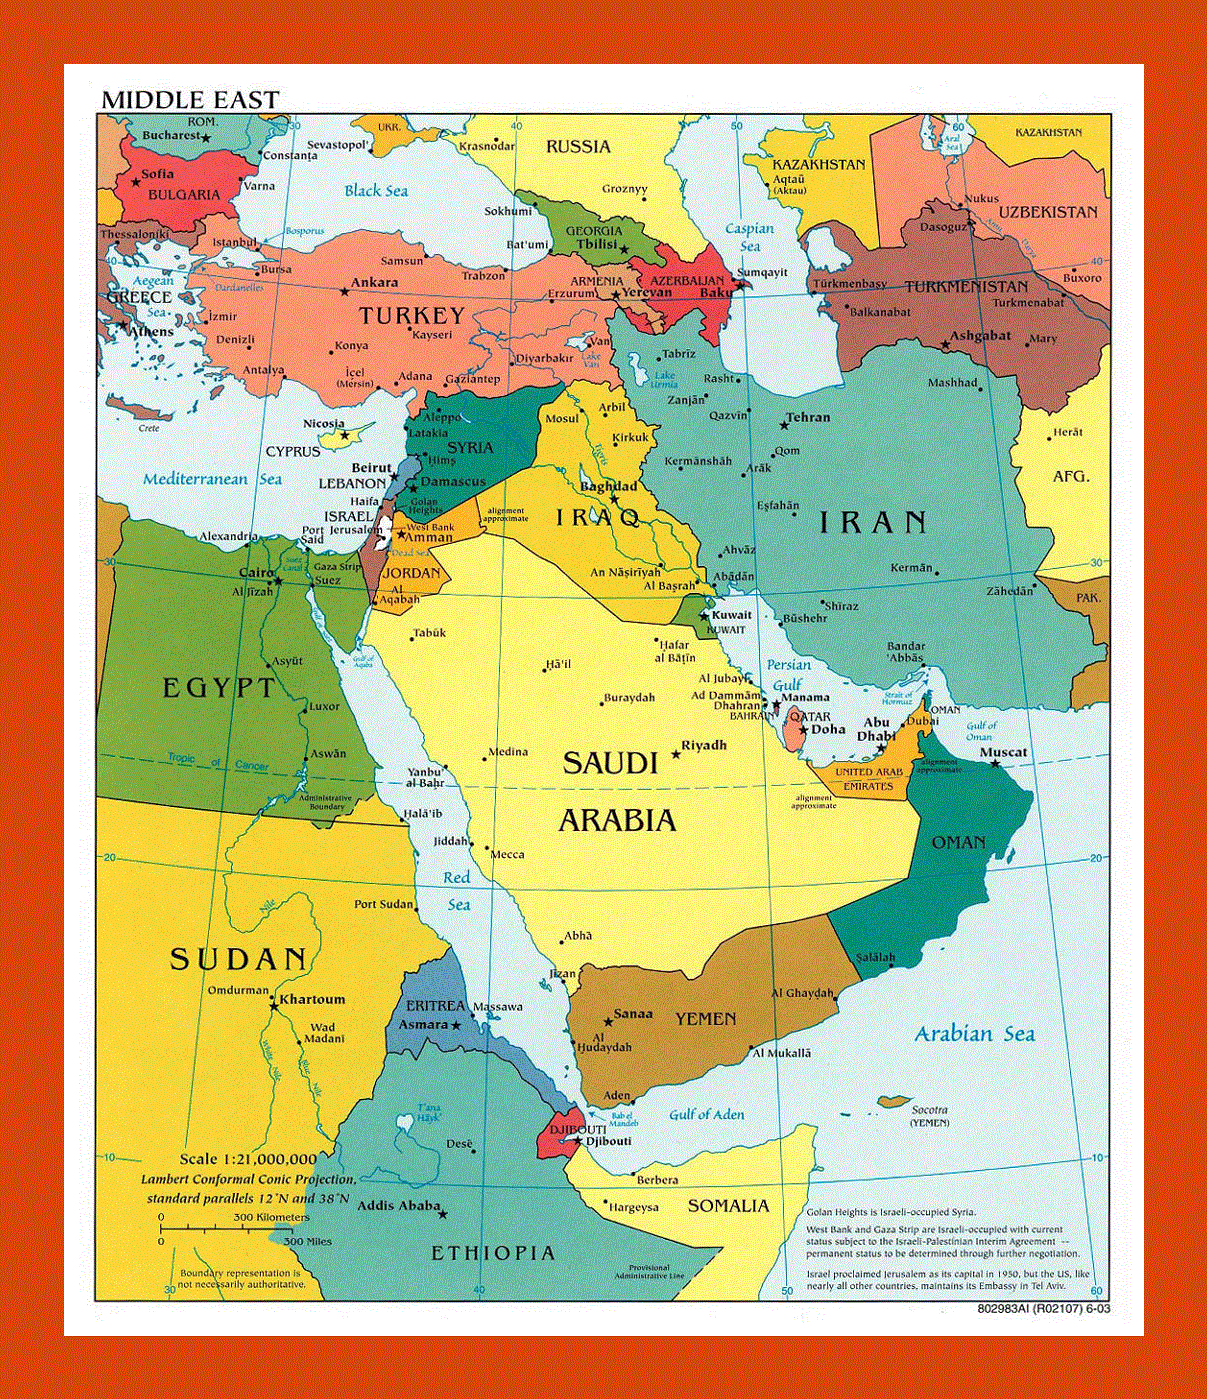 Political map of Middle East - 2003